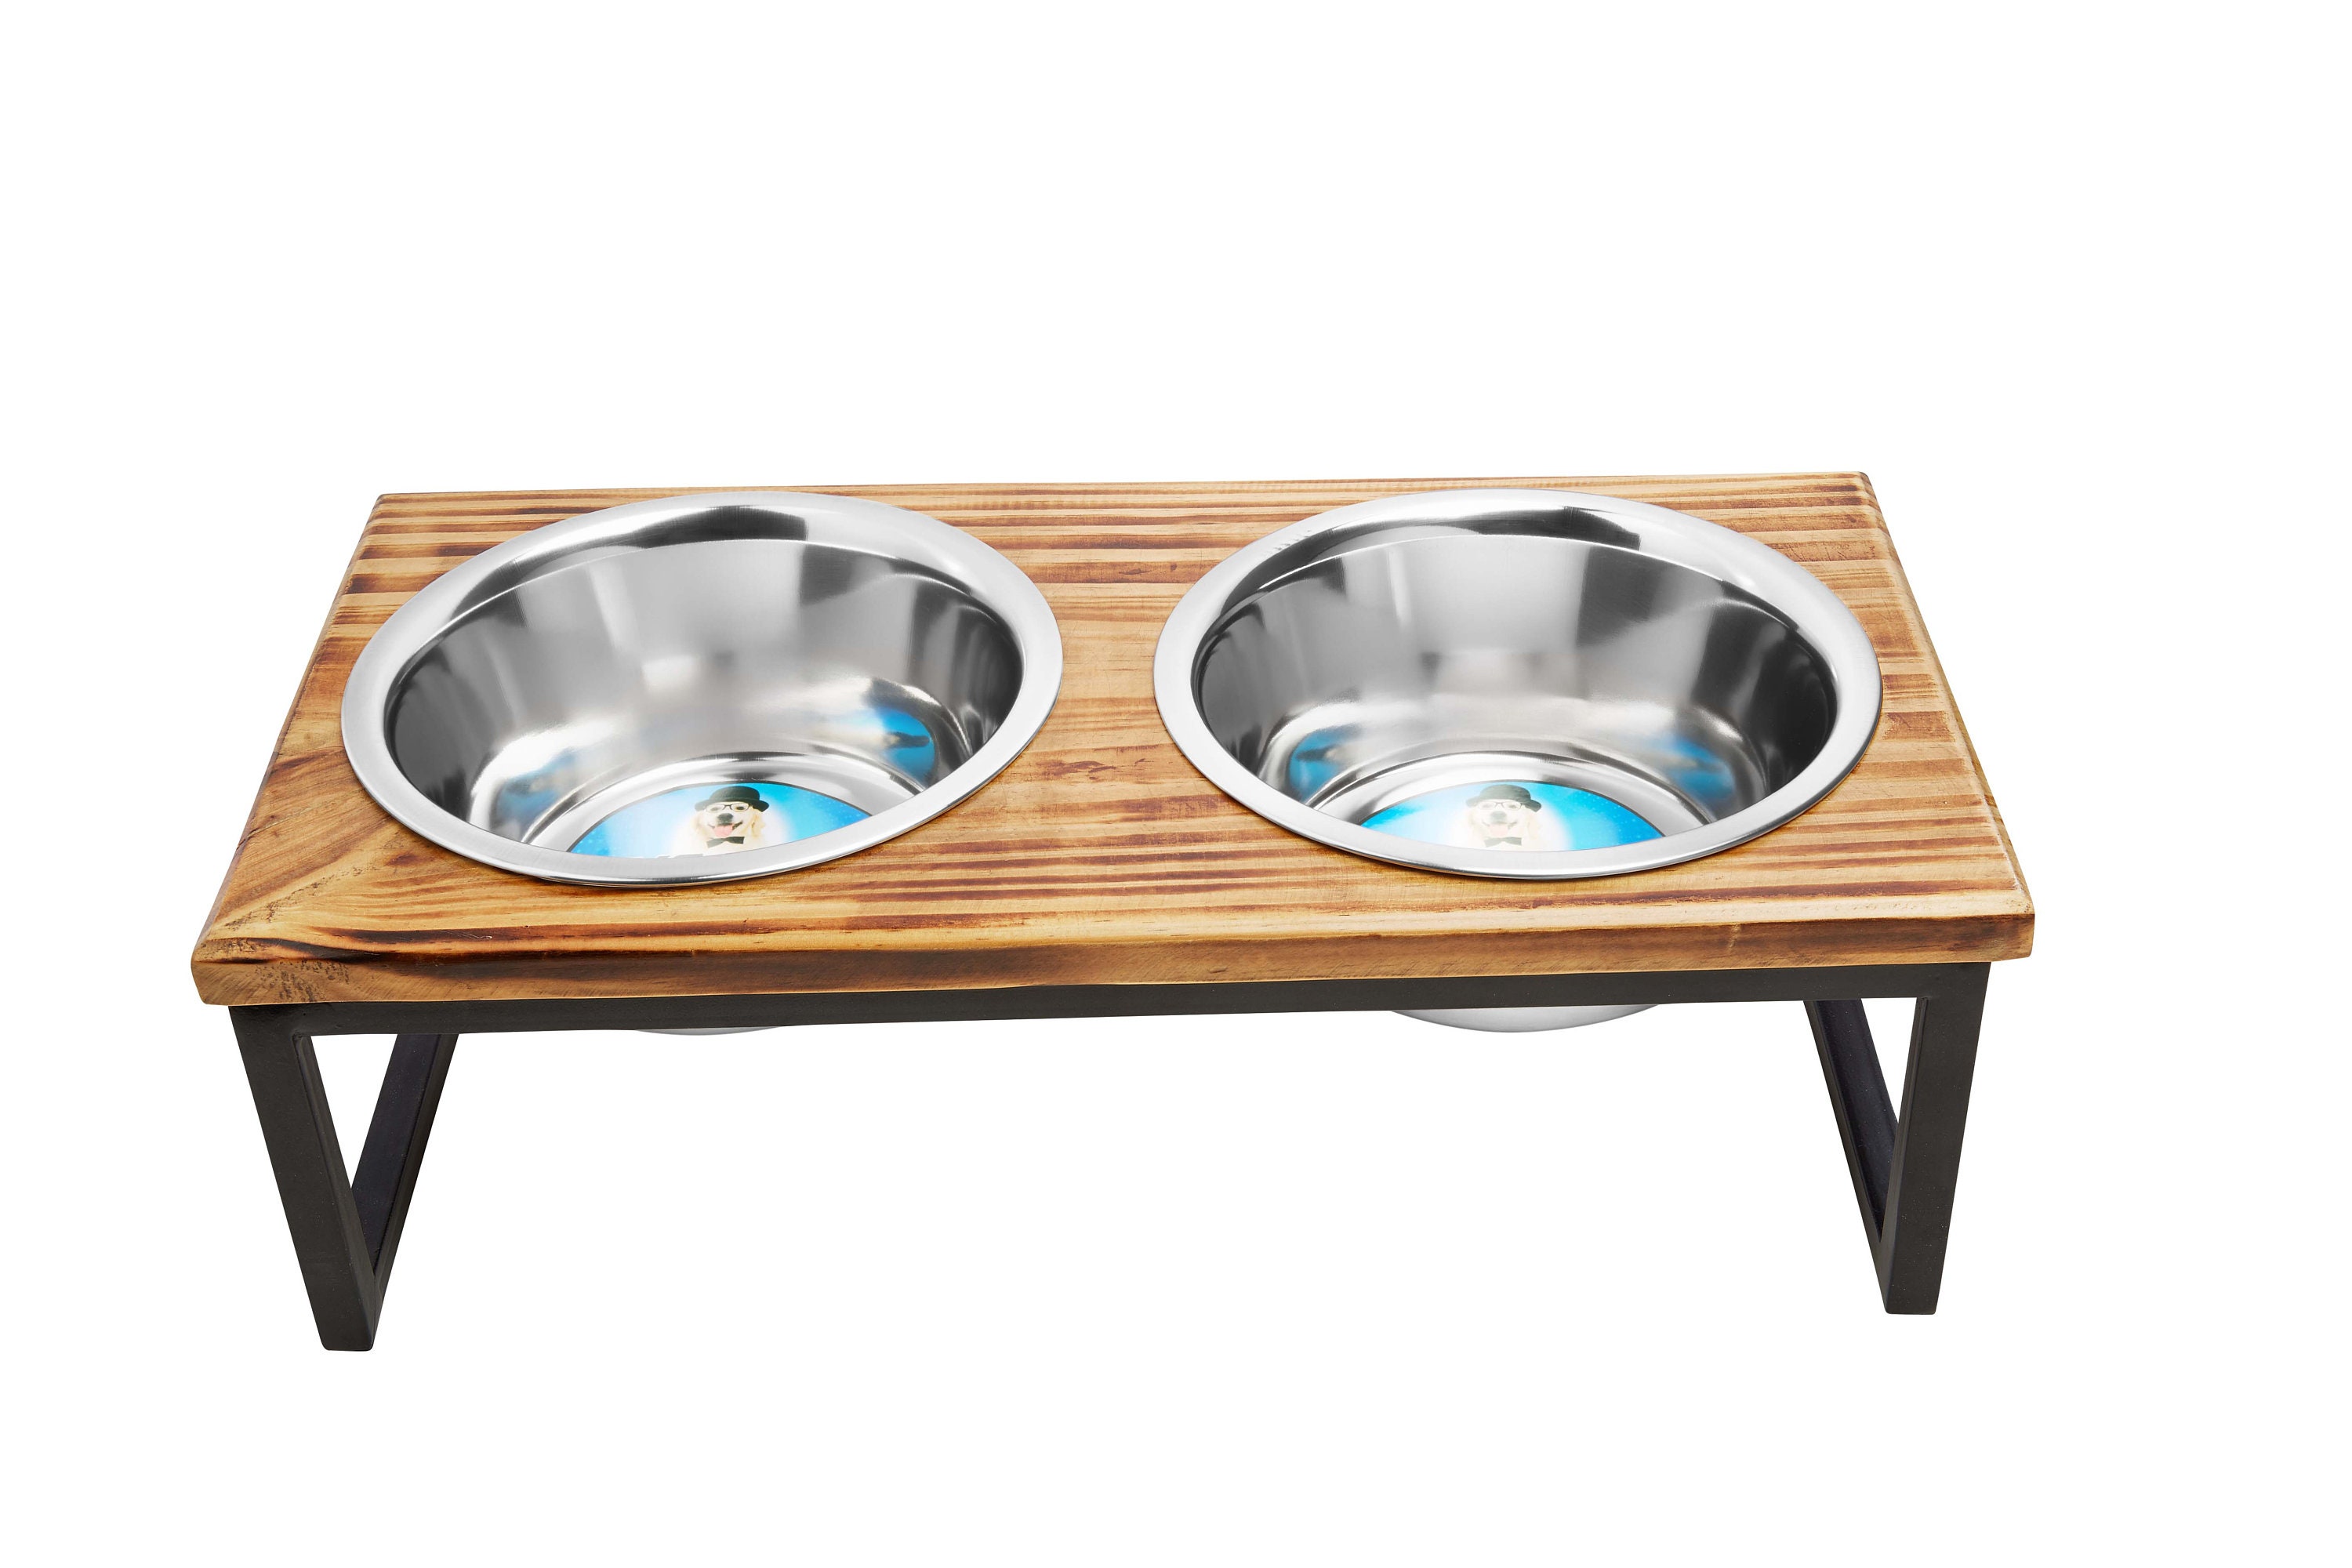 Large Dog Bowls 57.5oz/7.2cups/1700ml Elevated Single Bowl Stand